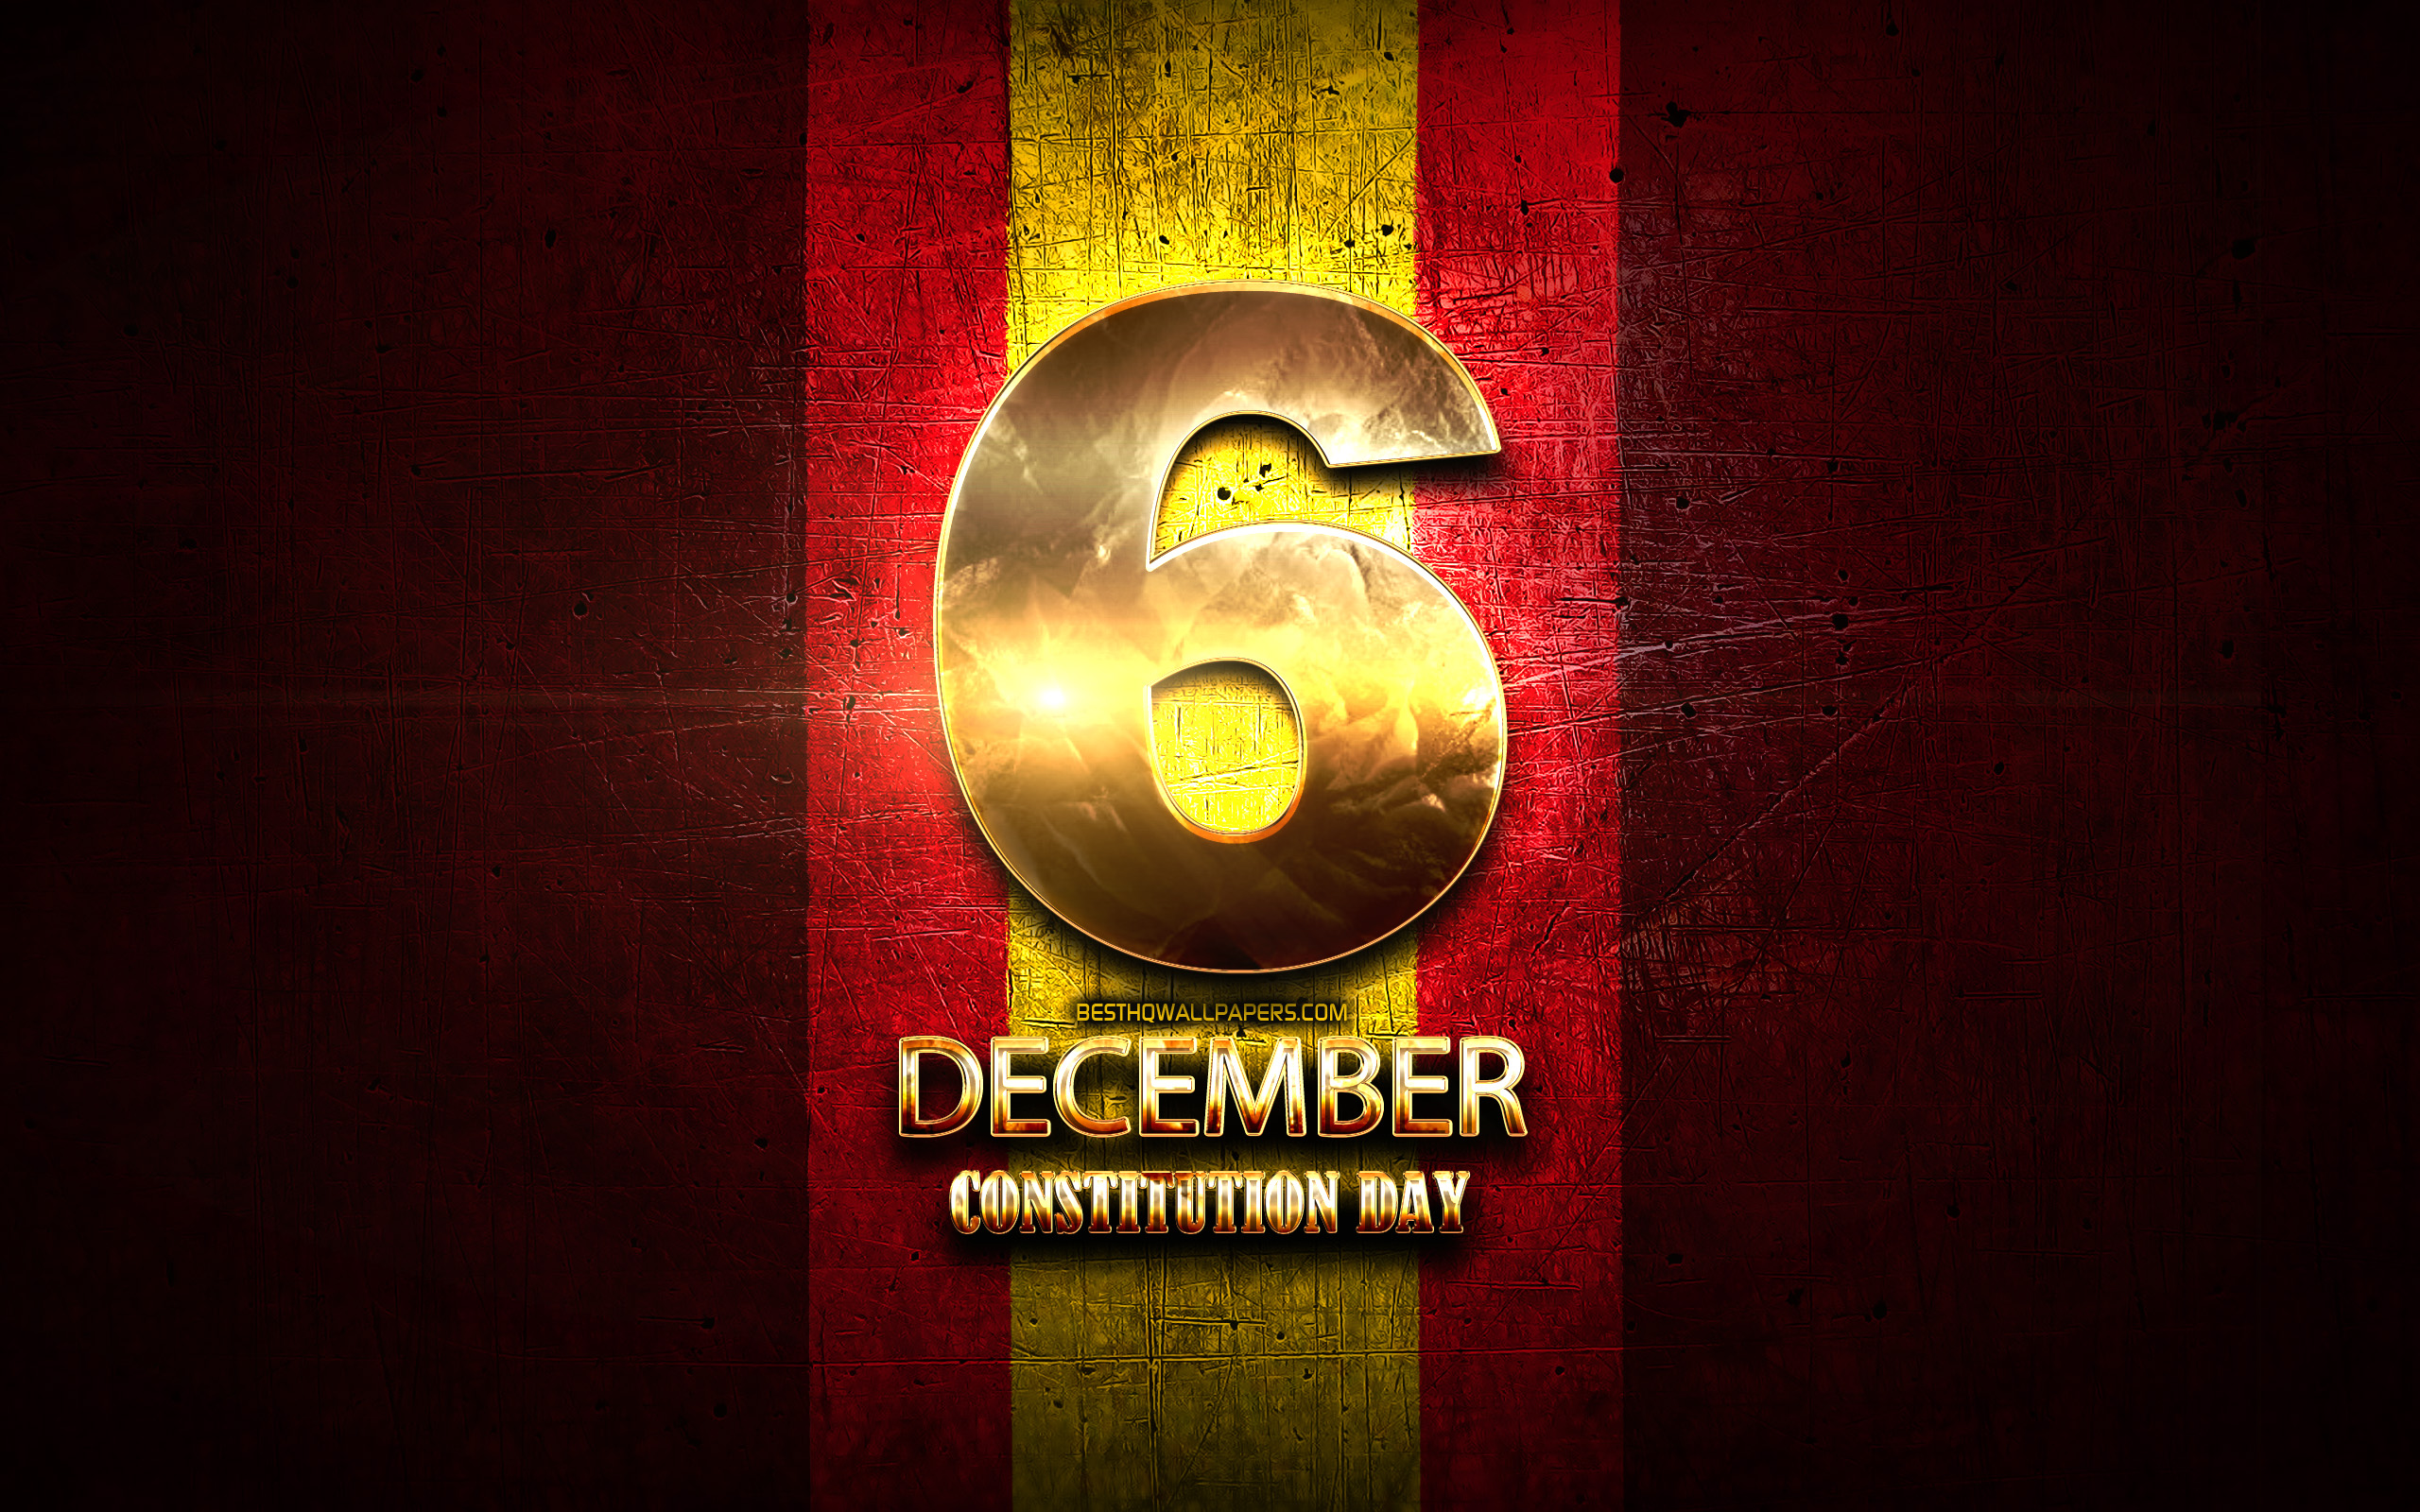 Constitution Day, December 6, Golden Signs, Spanish - Graphic Design , HD Wallpaper & Backgrounds